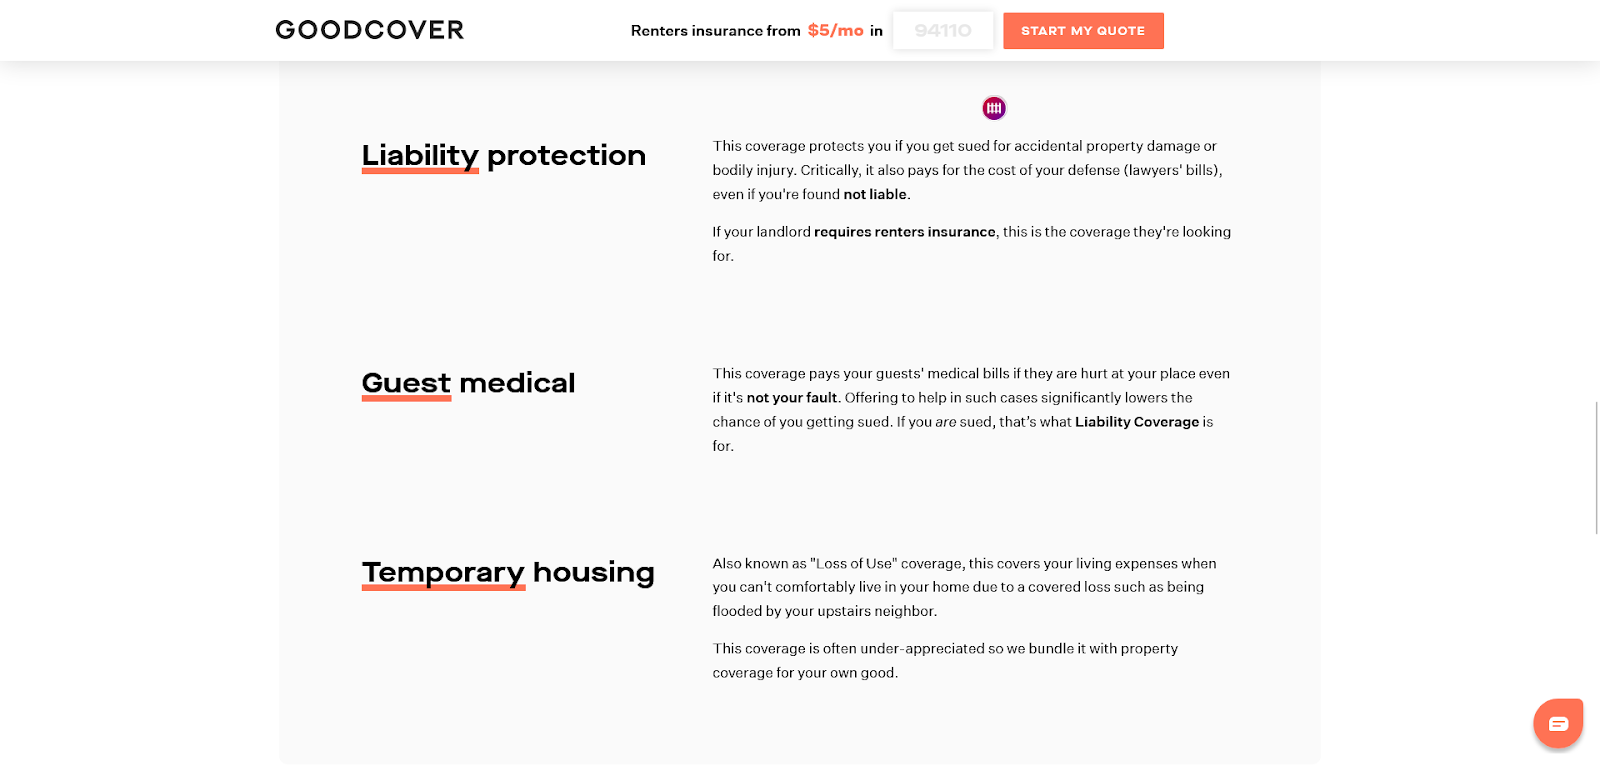 Image of Goodcover’s Liability Protection, Guest Medical, and Temporary Housing Benefits.